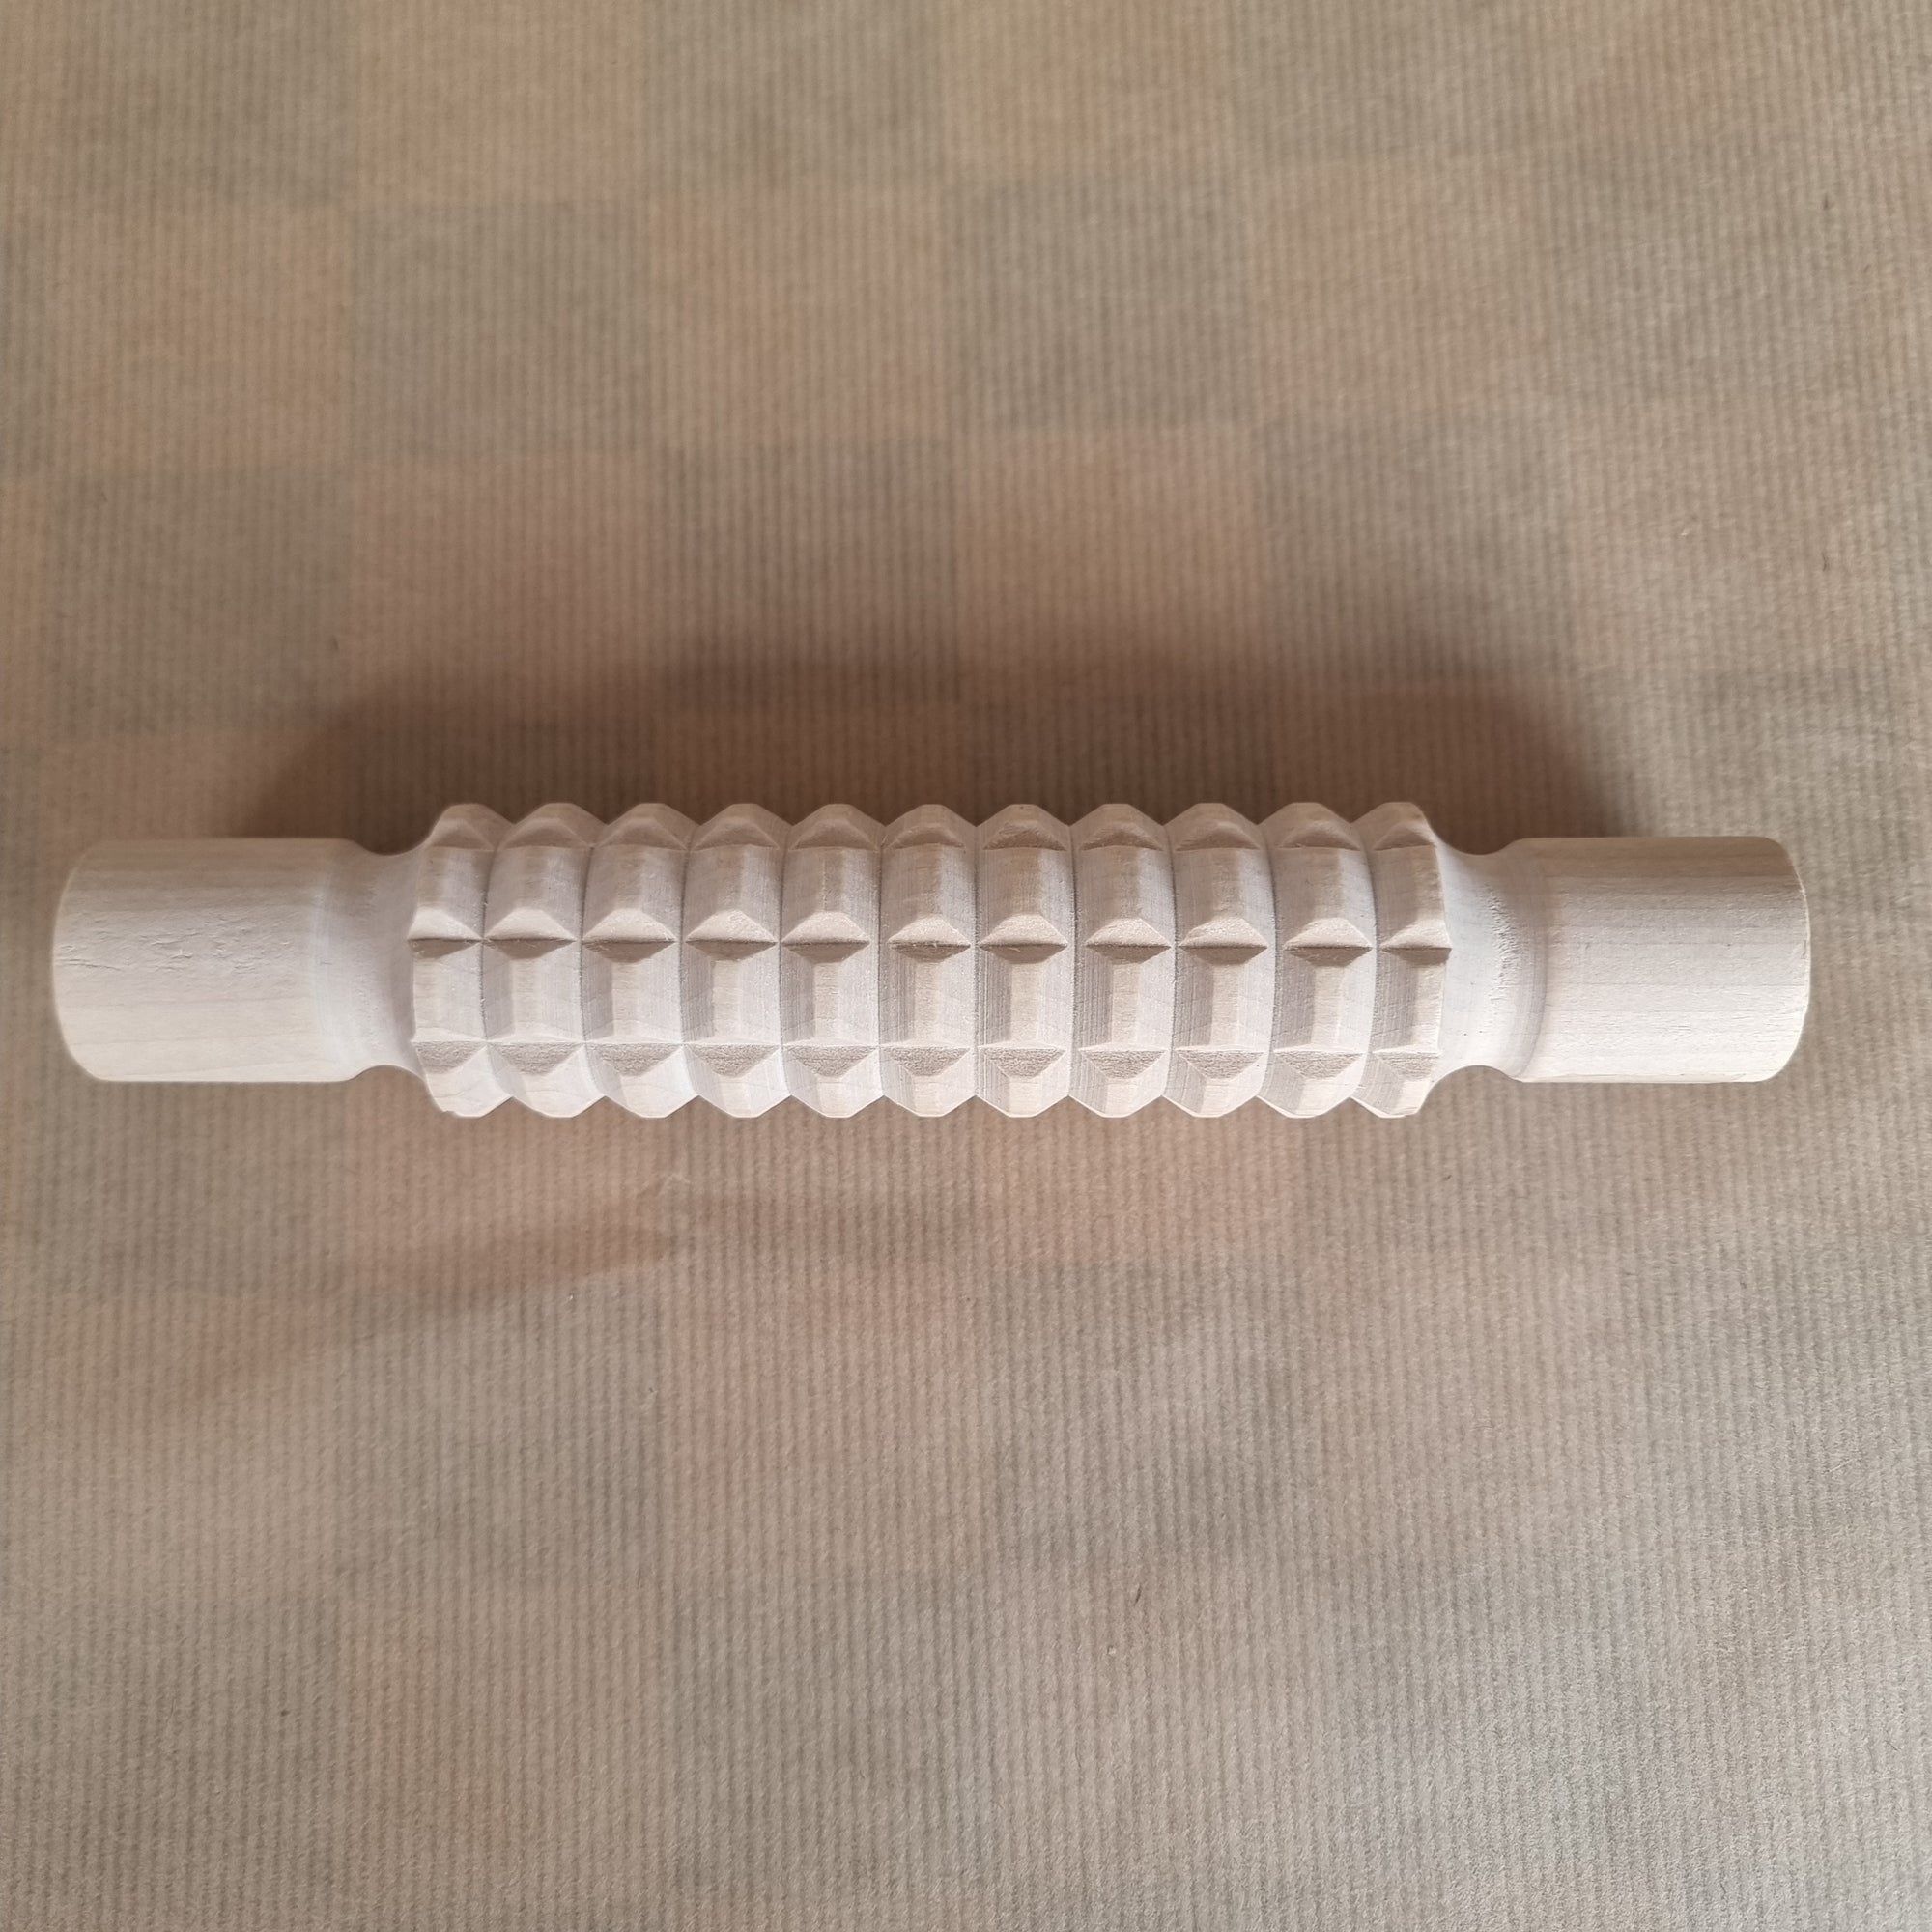 Patterned Rollers Rolling Pin